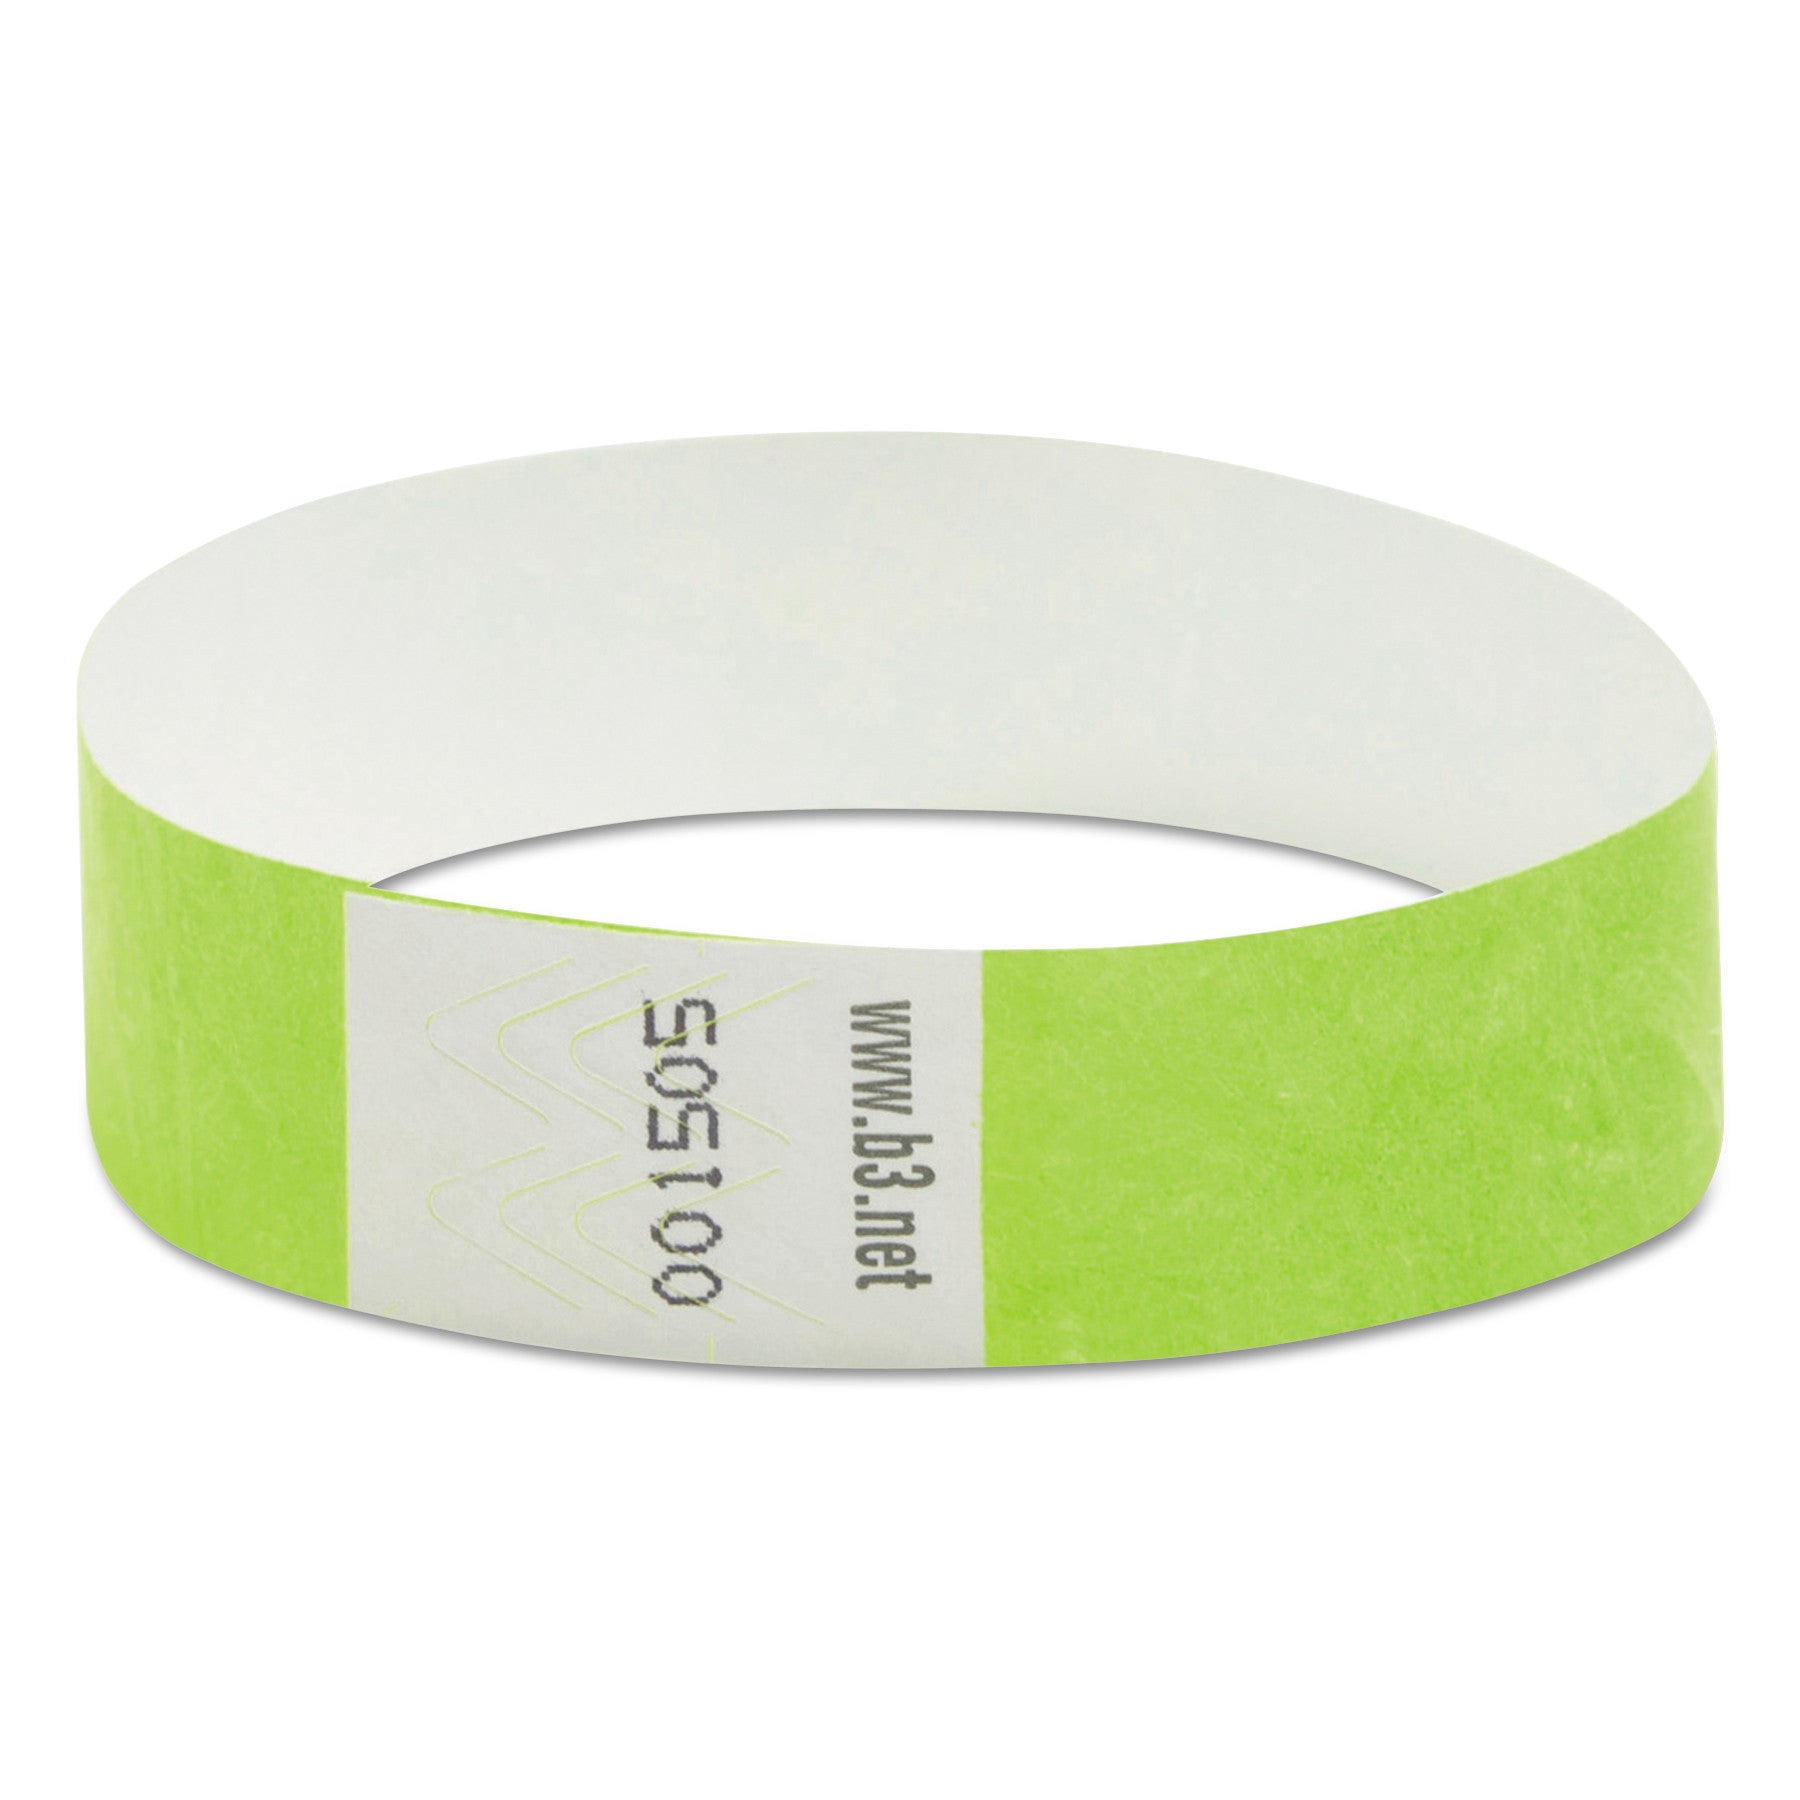 Security Wristbands, Sequentially Numbered, 10" x 0.75", Green, 100/Pack - 